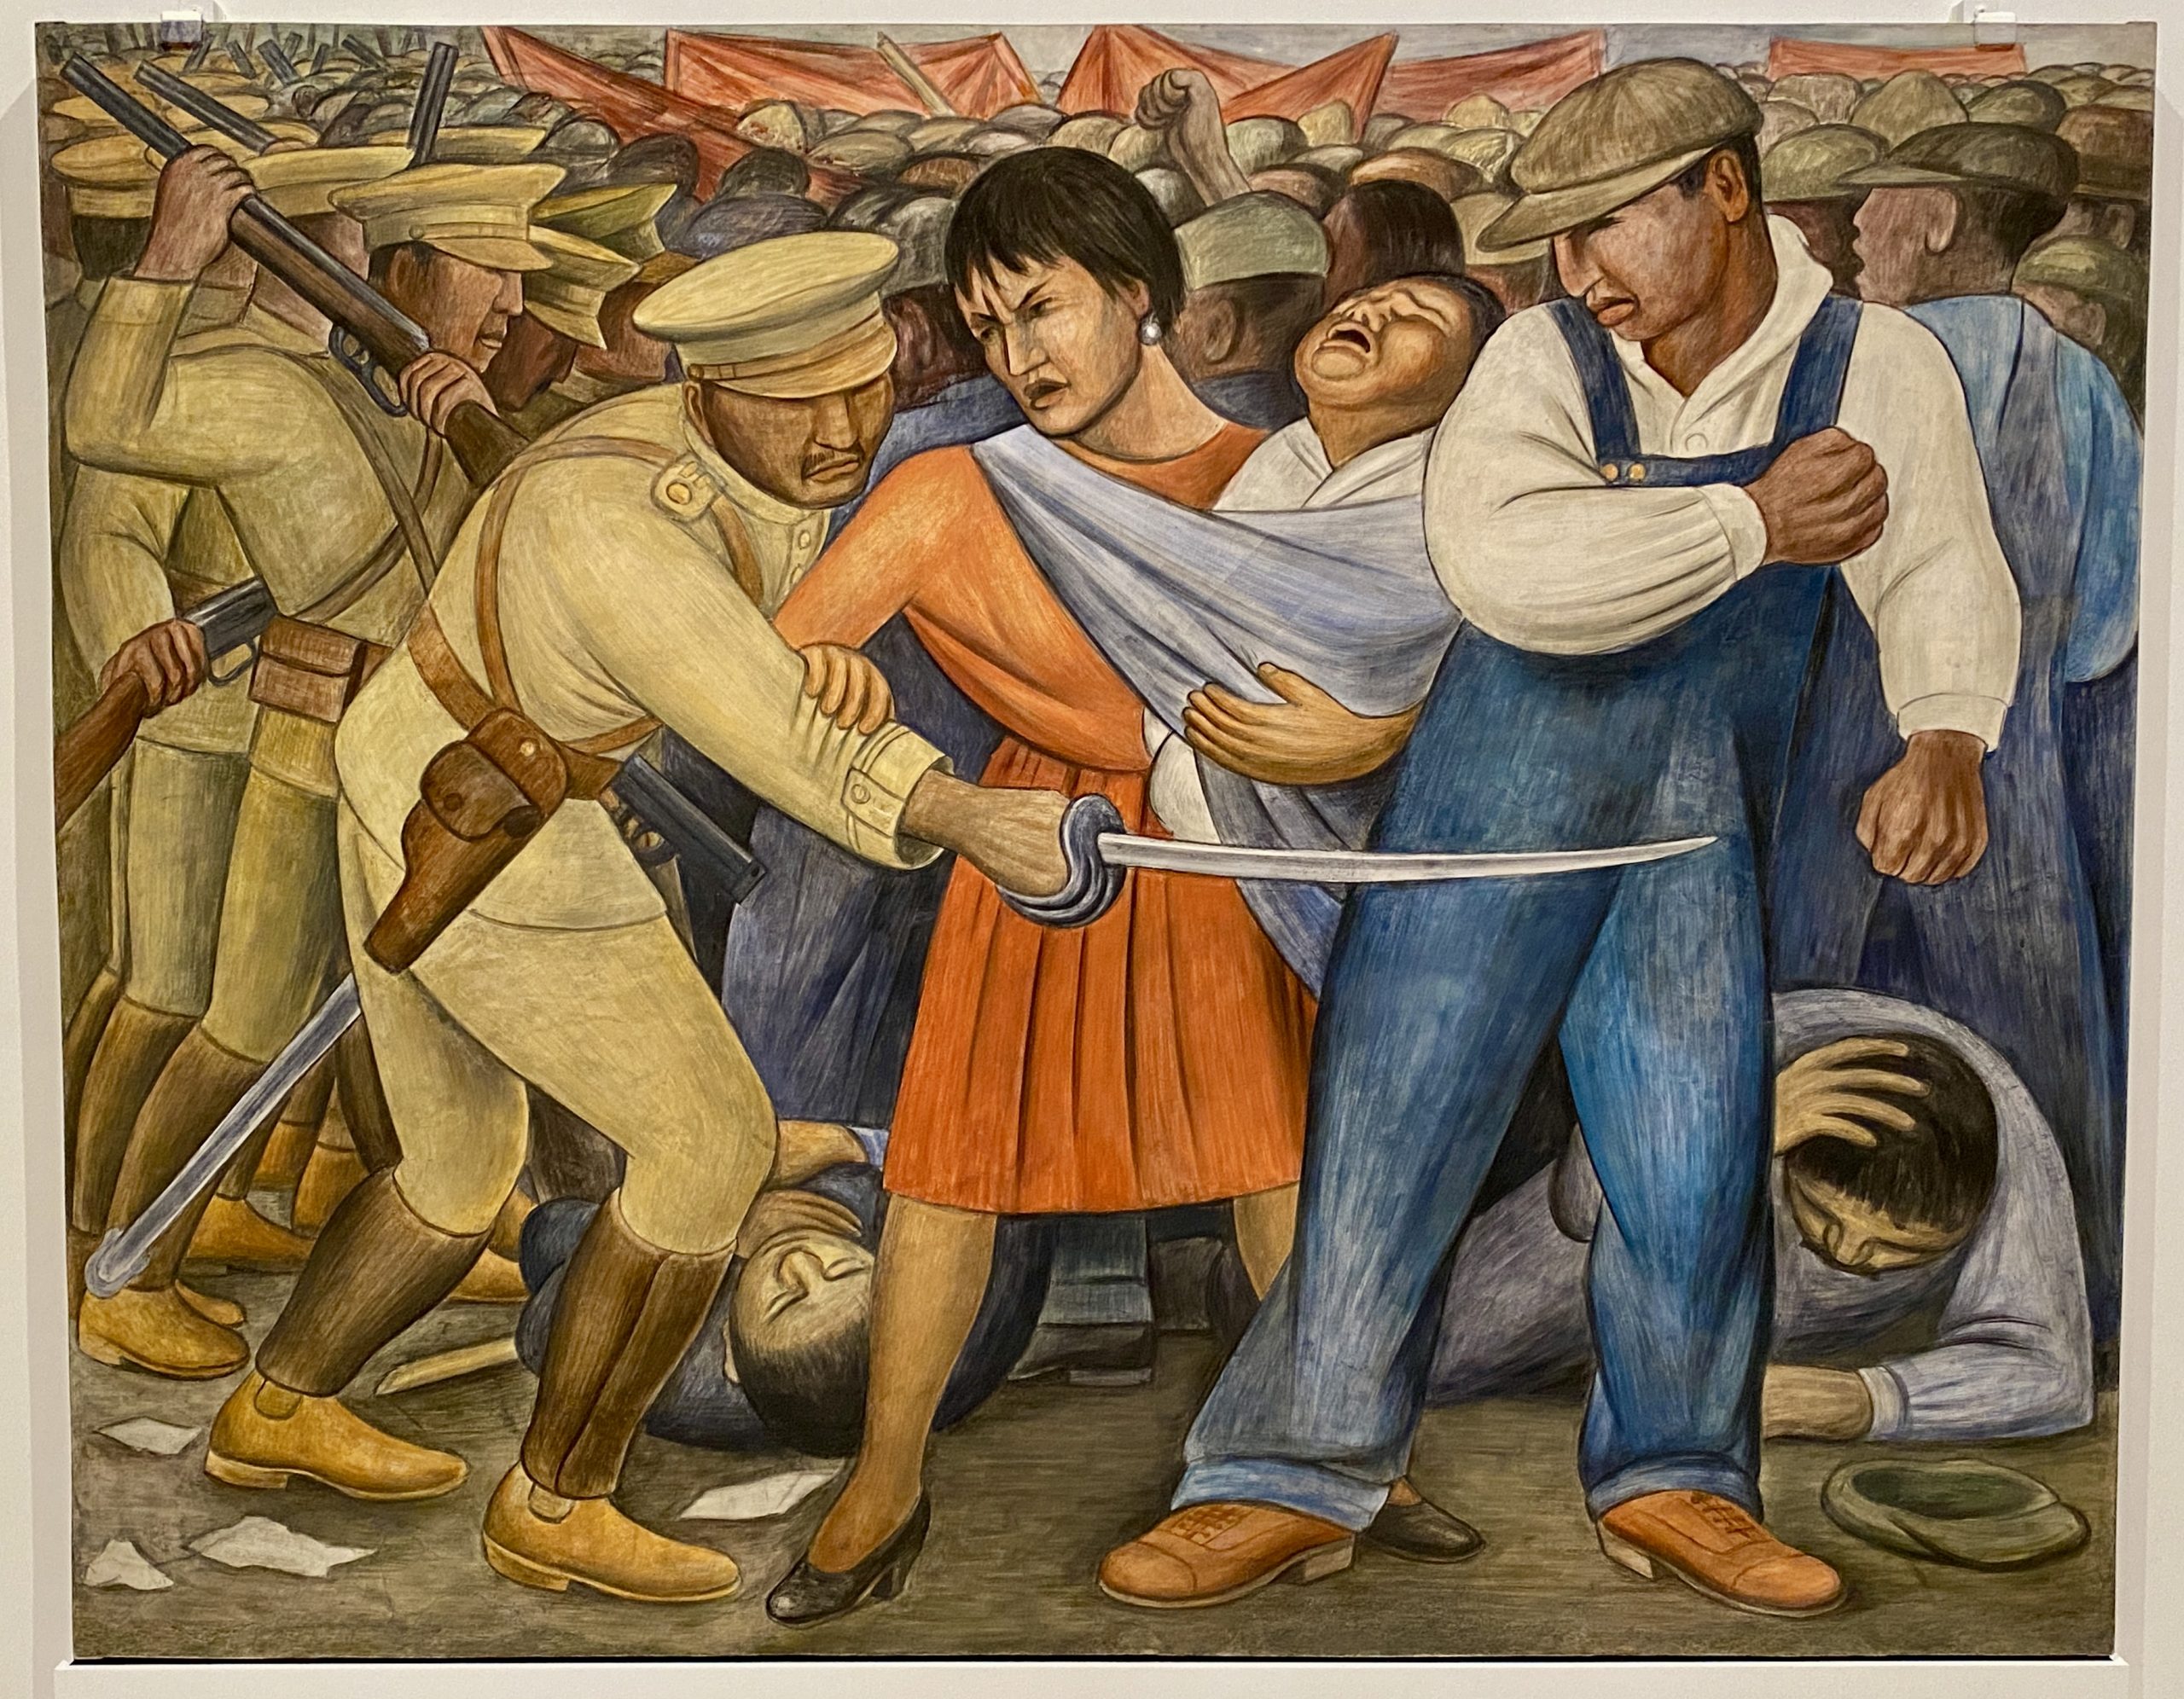 Exploring The Overlooked Influence Of Mexican Artists On American Art